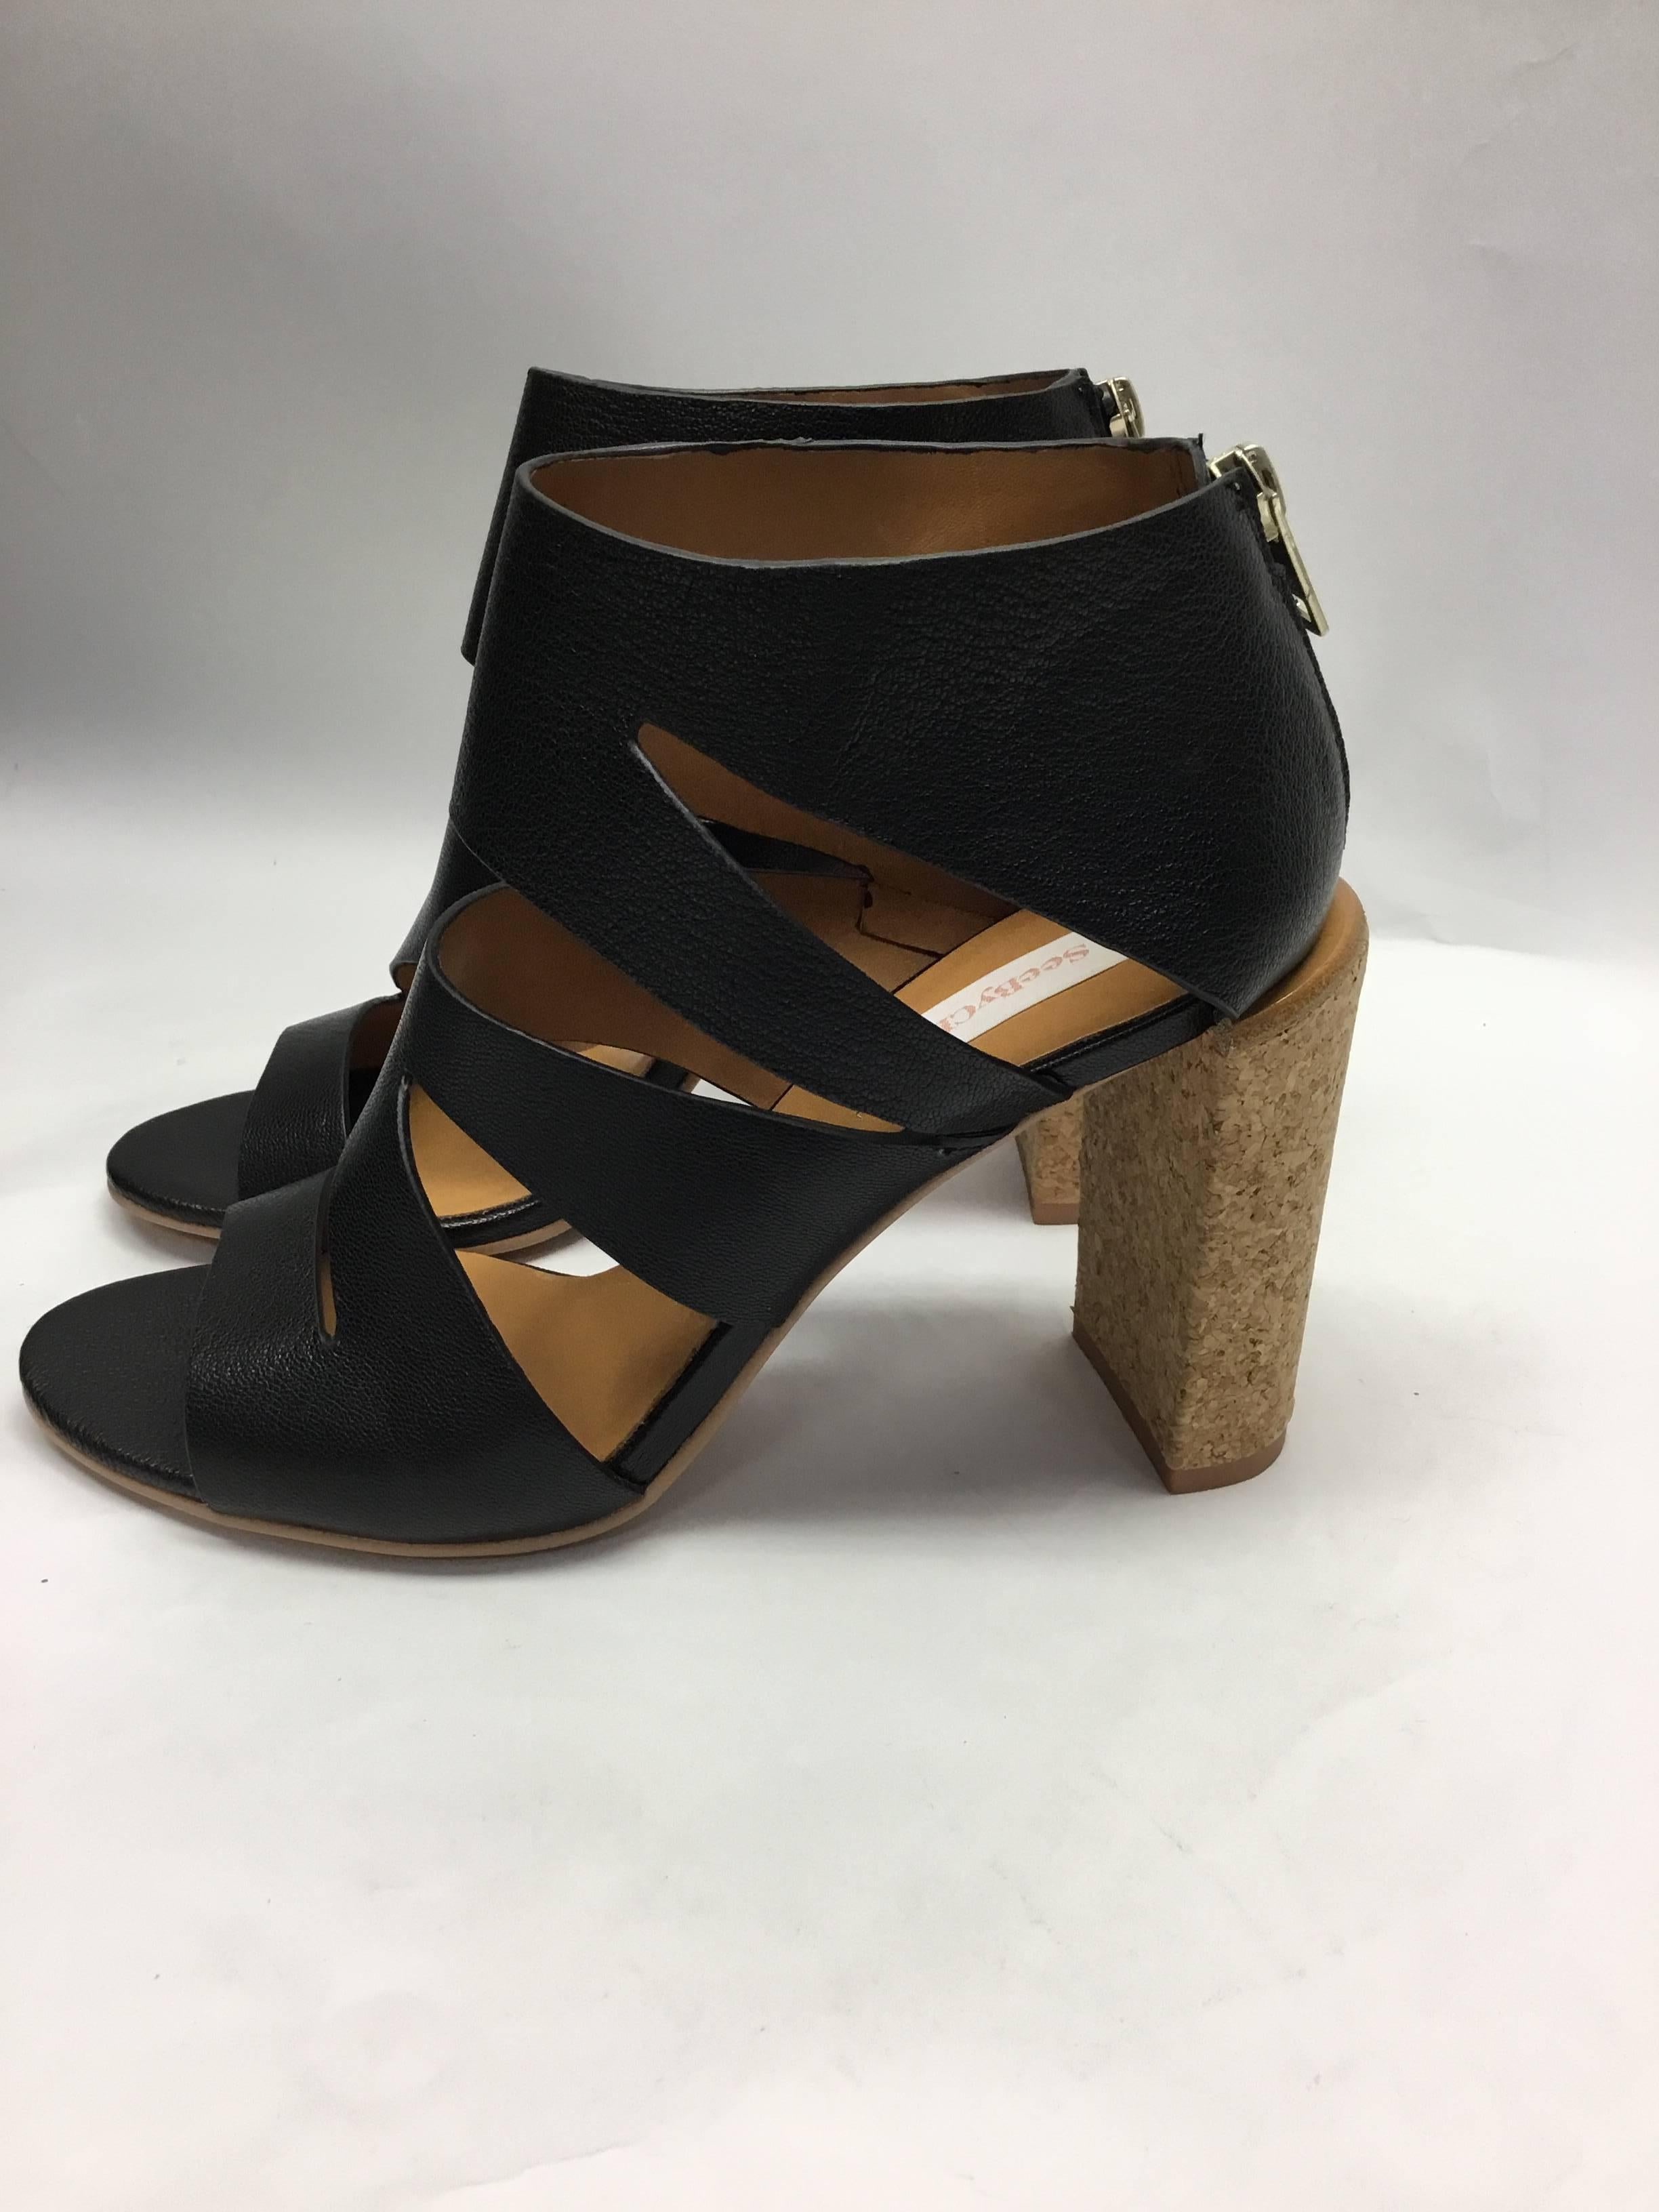 See By Chloe Black Leather Cut Out Heels
4 inch heel
Black leather cut out style
Cork heel, zip up back
Size 38.5
$250